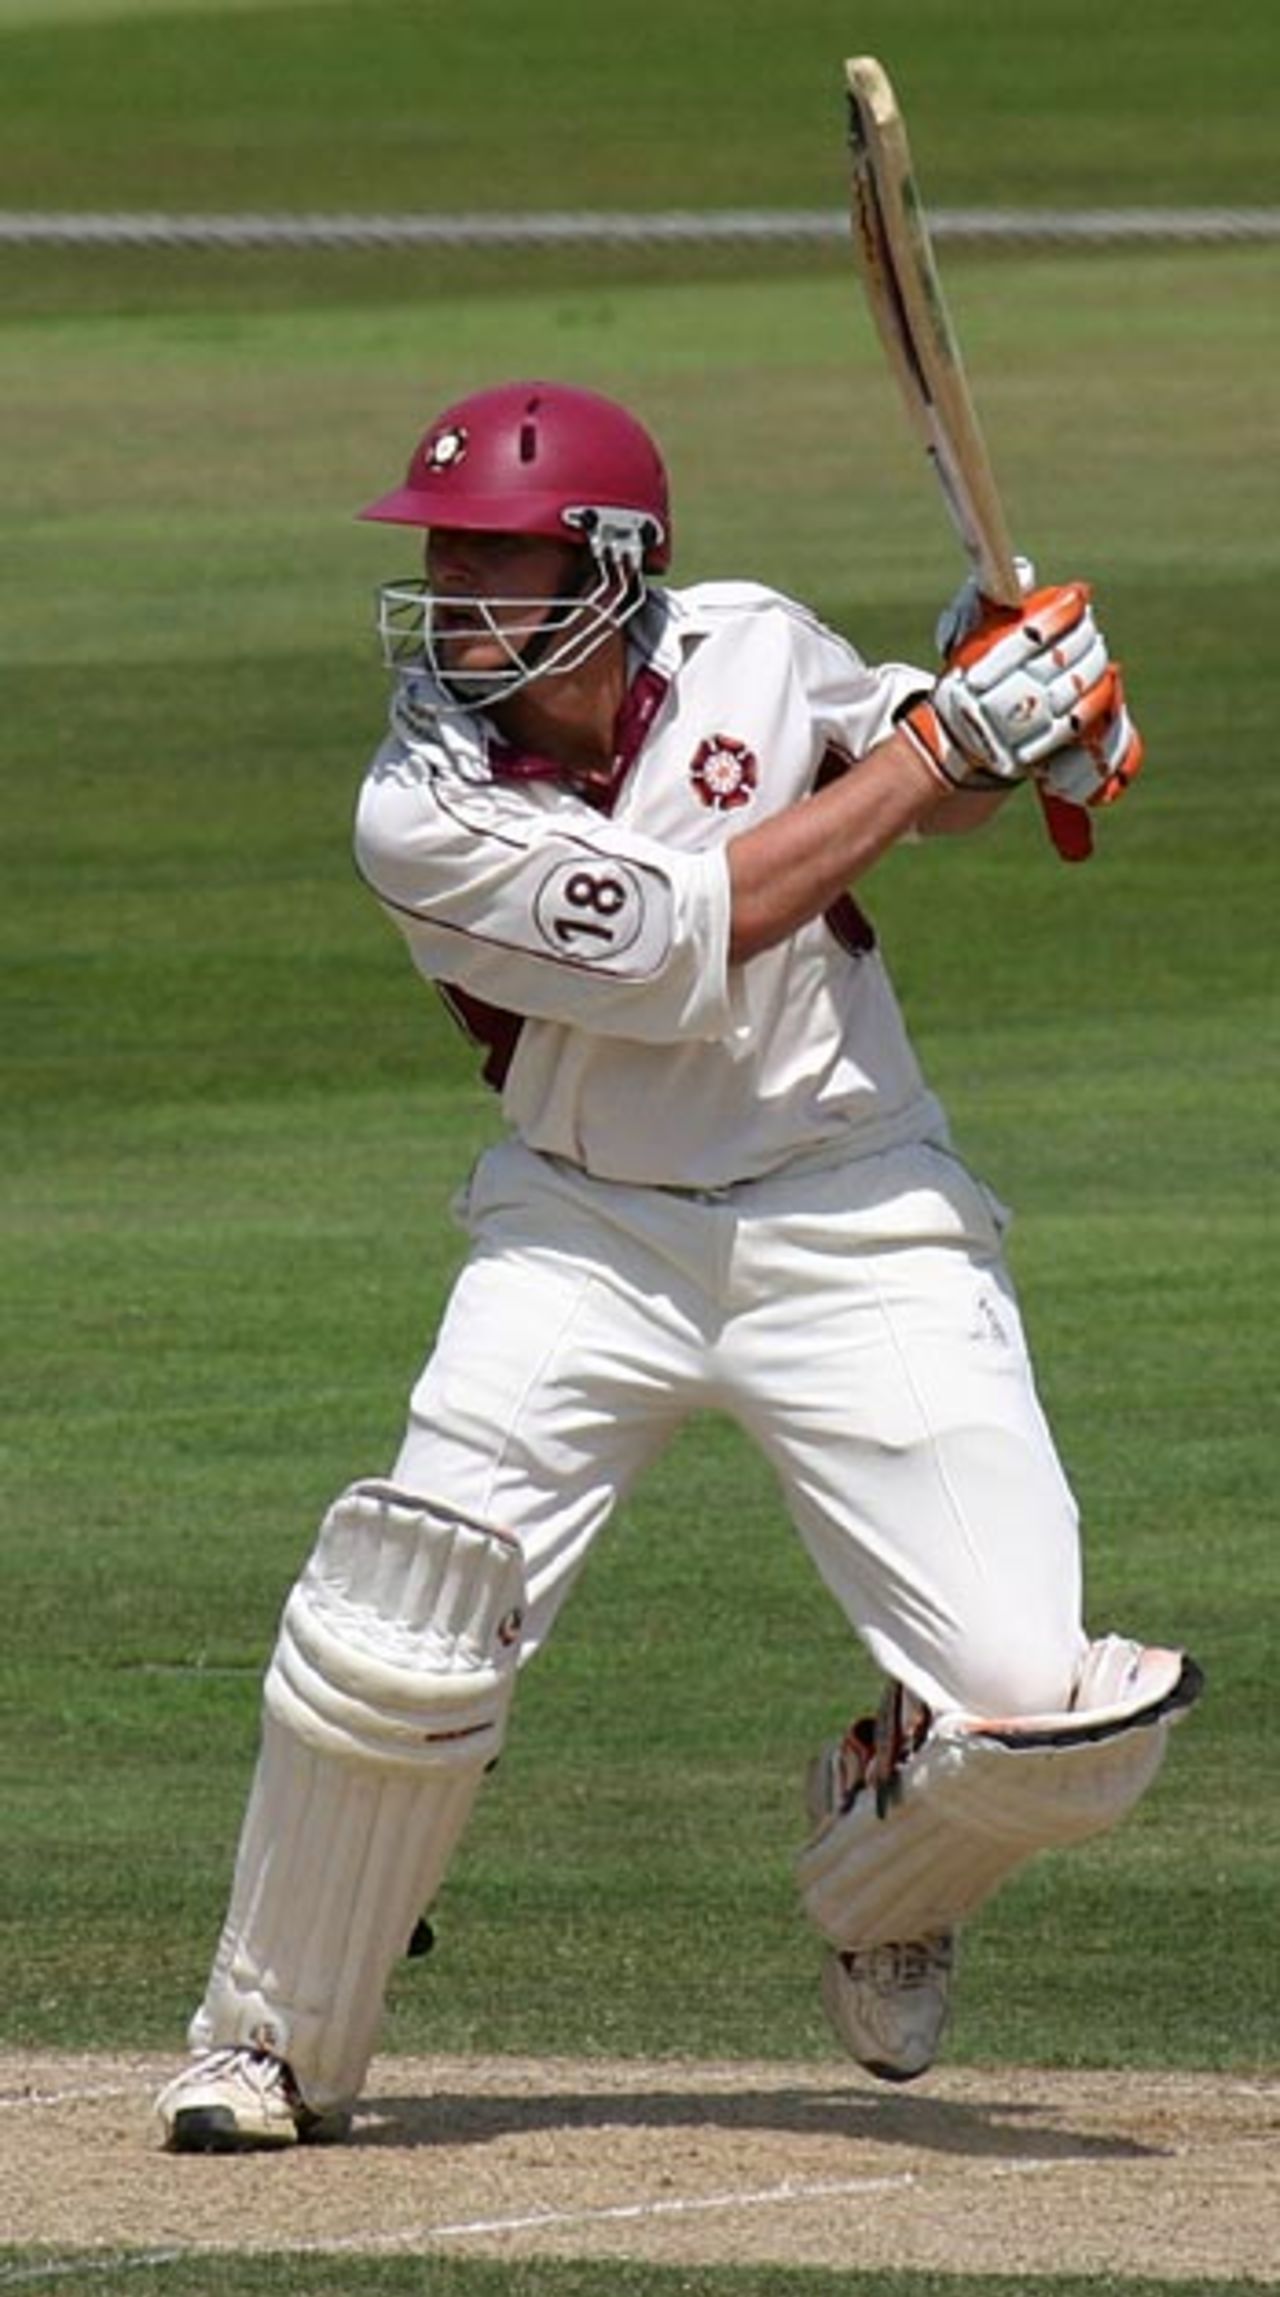 Robert White in action on his way to 30, Surrey v Northants, The Oval, August 2, 2006